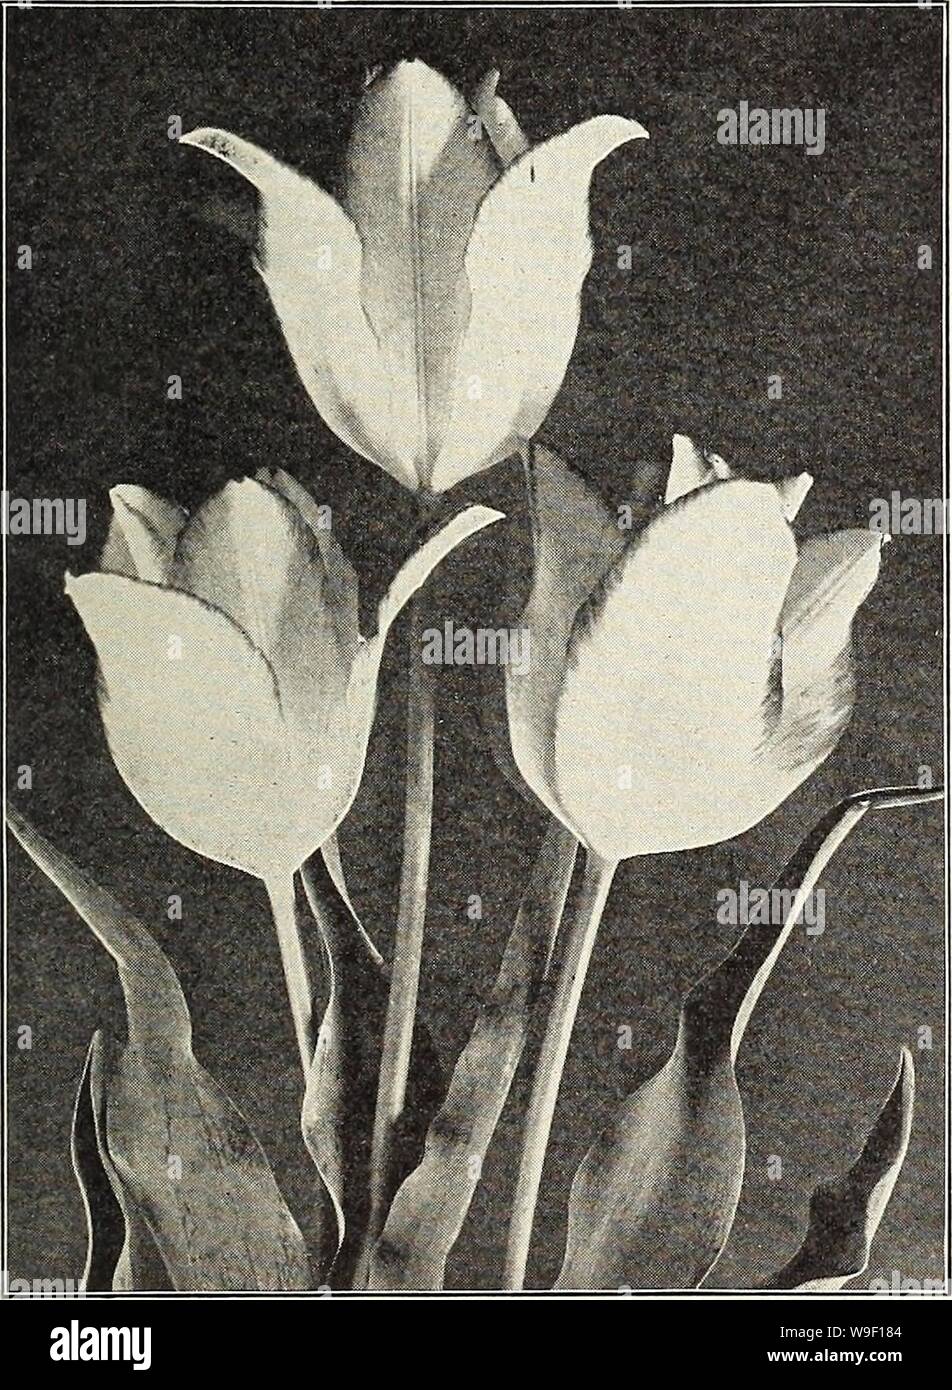 Archive image from page 8 of Currie's bulbs and plants . Currie's bulbs and plants : autumn 1926  curriesbulbsplan19curr 3 Year: 1926 ( CURRIE BROS. CO. AUTUMN CATALOGUE, 1926 Early Double Flowering Tulips Each Doz. 100 1000 c 8 Boule de Neige (Snowball)—Fine large, pure, double white S .09 S .85 S6.25 $46.00 c 8 Cochineal—Large vermillion scarlet. .. .08 .80 6.00 44.00 c 9 Couronne des Roses—Finest Rose 09 .85 6.25 48.00 b 10 Couronne d'Or—Orange 08 .80 6.00 46.00 b 6 Due Van Tholl—Red and yellow 08 .80 6.00 44.00 c 8 Duke of York—A lovely violet, white bordered 09 .85 6.25 48.00 c 9 Gloria S Stock Photo